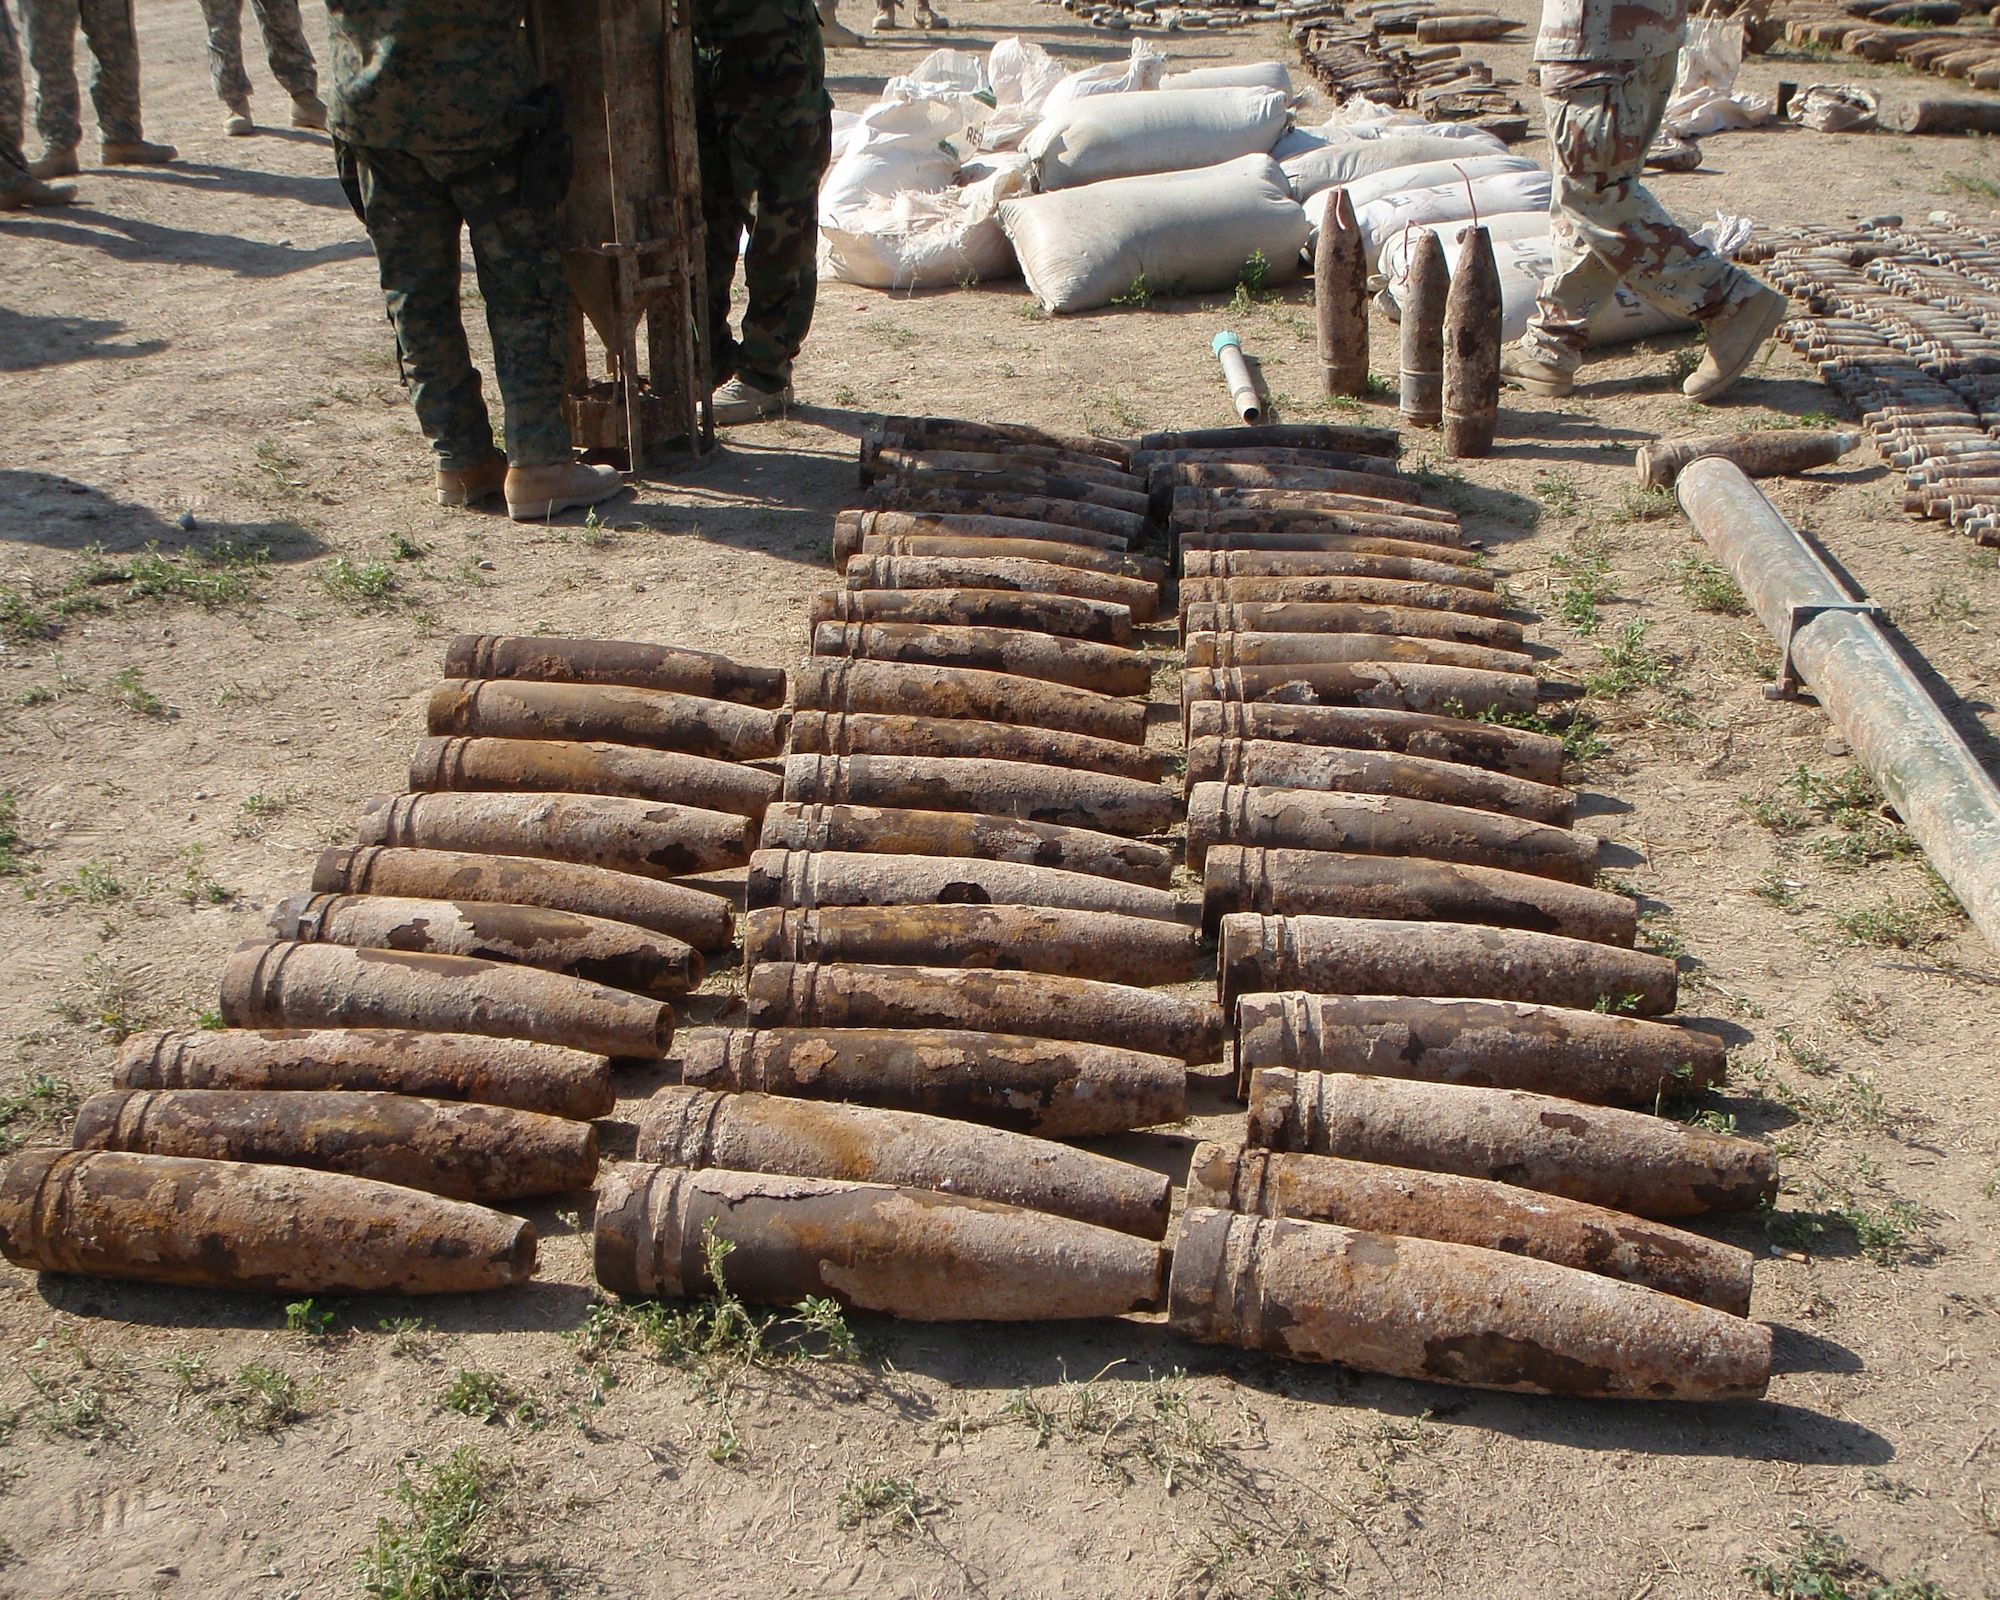 Explosive devices are identified and inventoried before being destroyed by Explosive Ordnance Disposal specialists from the 447th Expeditionary Civil Engineer Squadron Explosive Ordnance Disposal Alpha Flight, Sather Air Base, Iraq. (U.S. Air Force photo)    